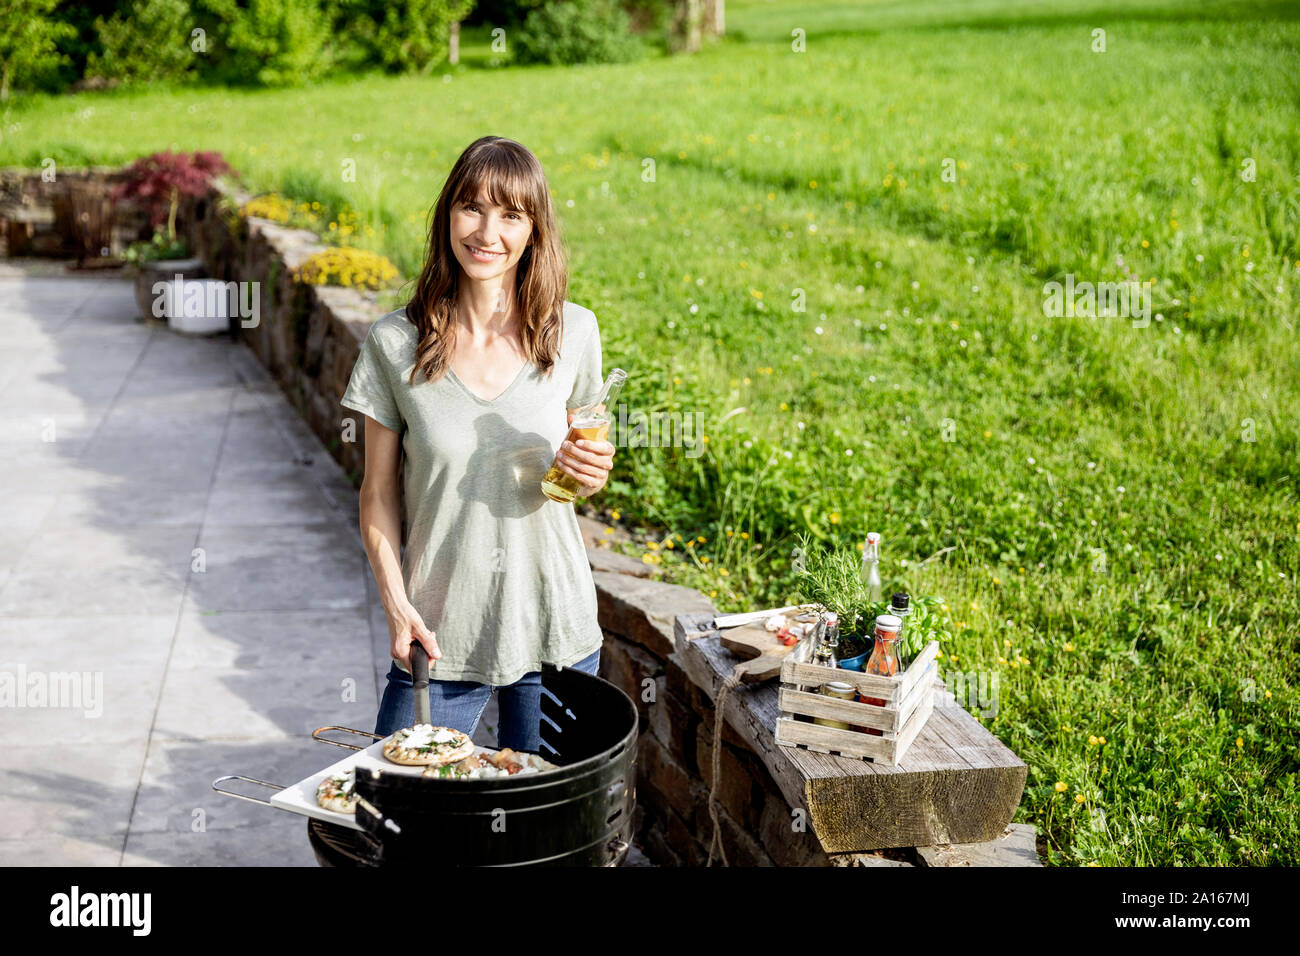 Portrait of smiling woman preparing food on barbecue grill Stock Photo